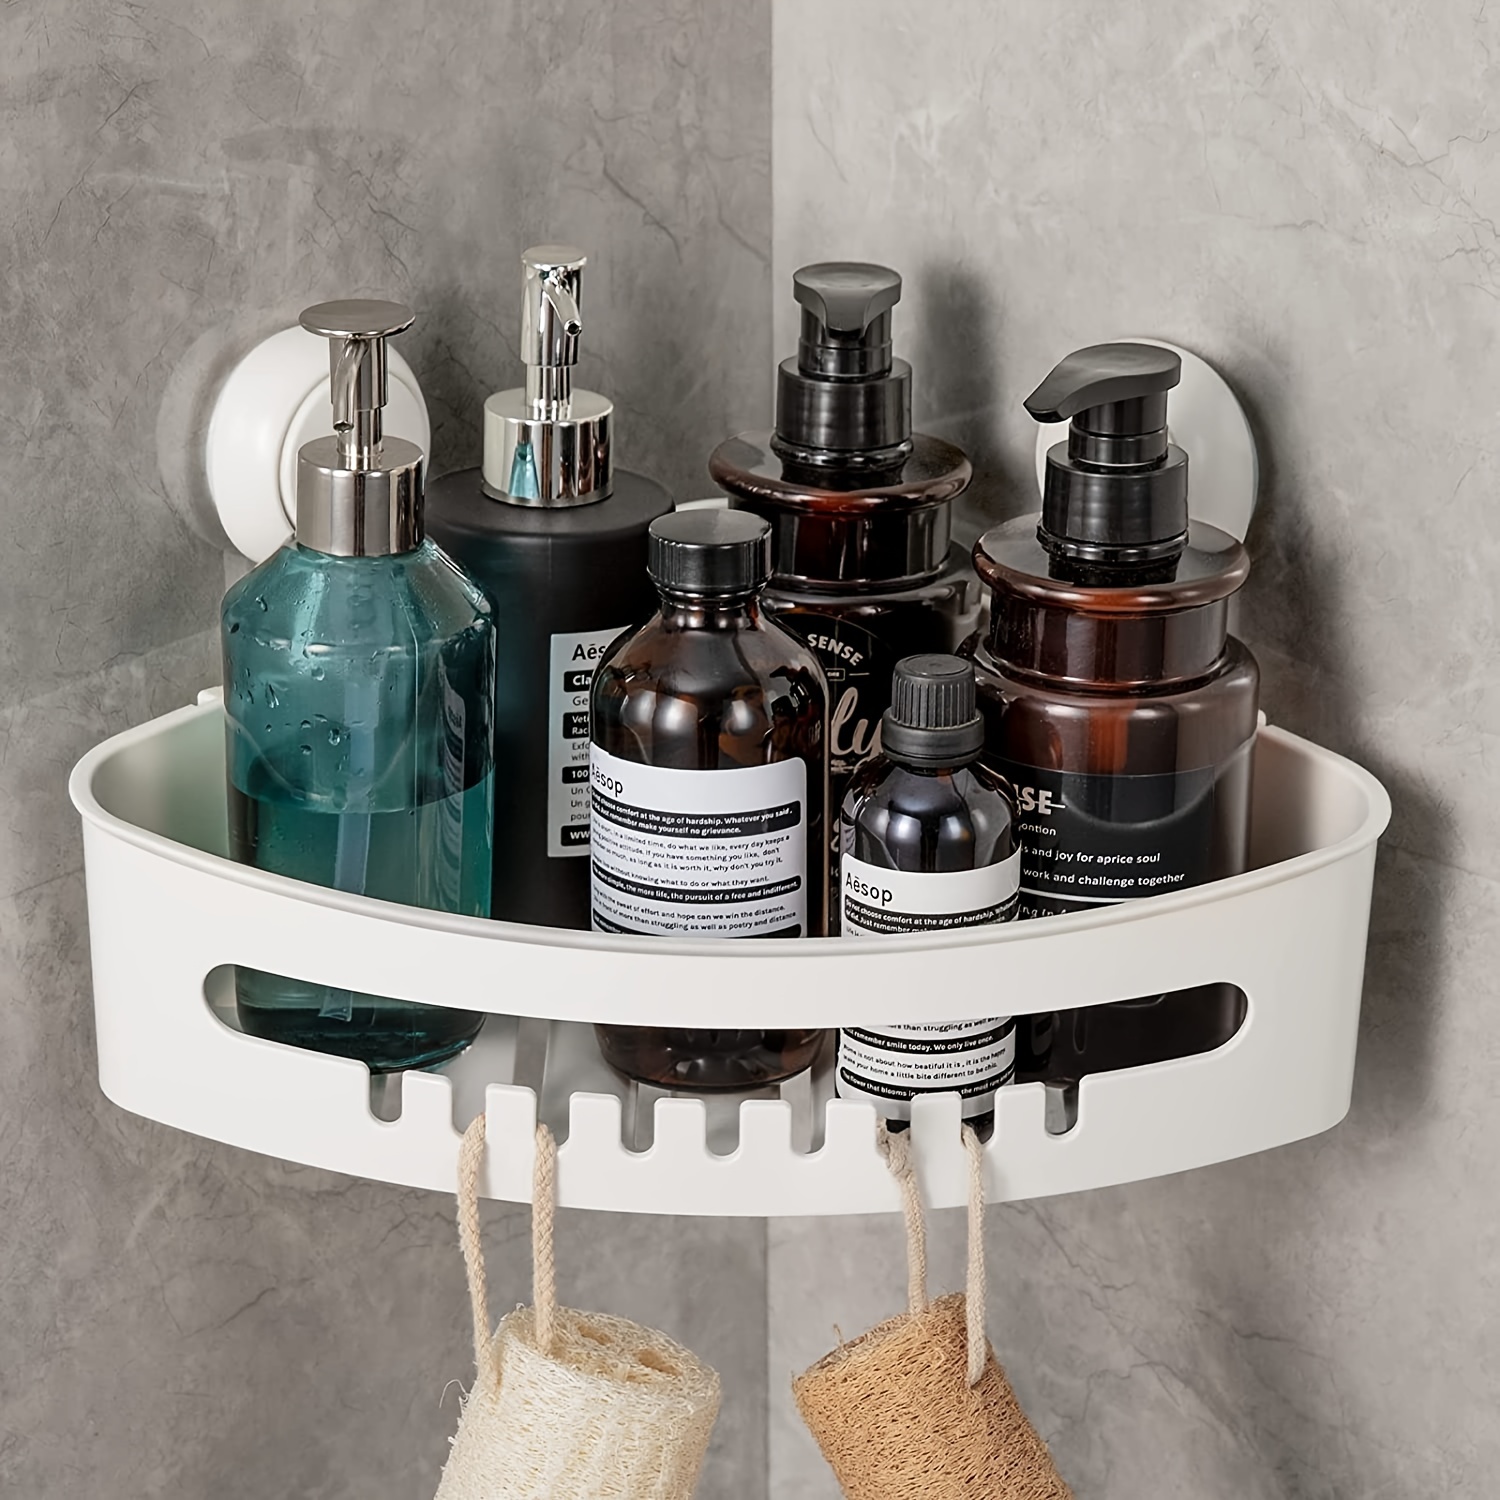 LUXEAR Shower Caddy Suction Cup NO-Drilling Removable Bathroom